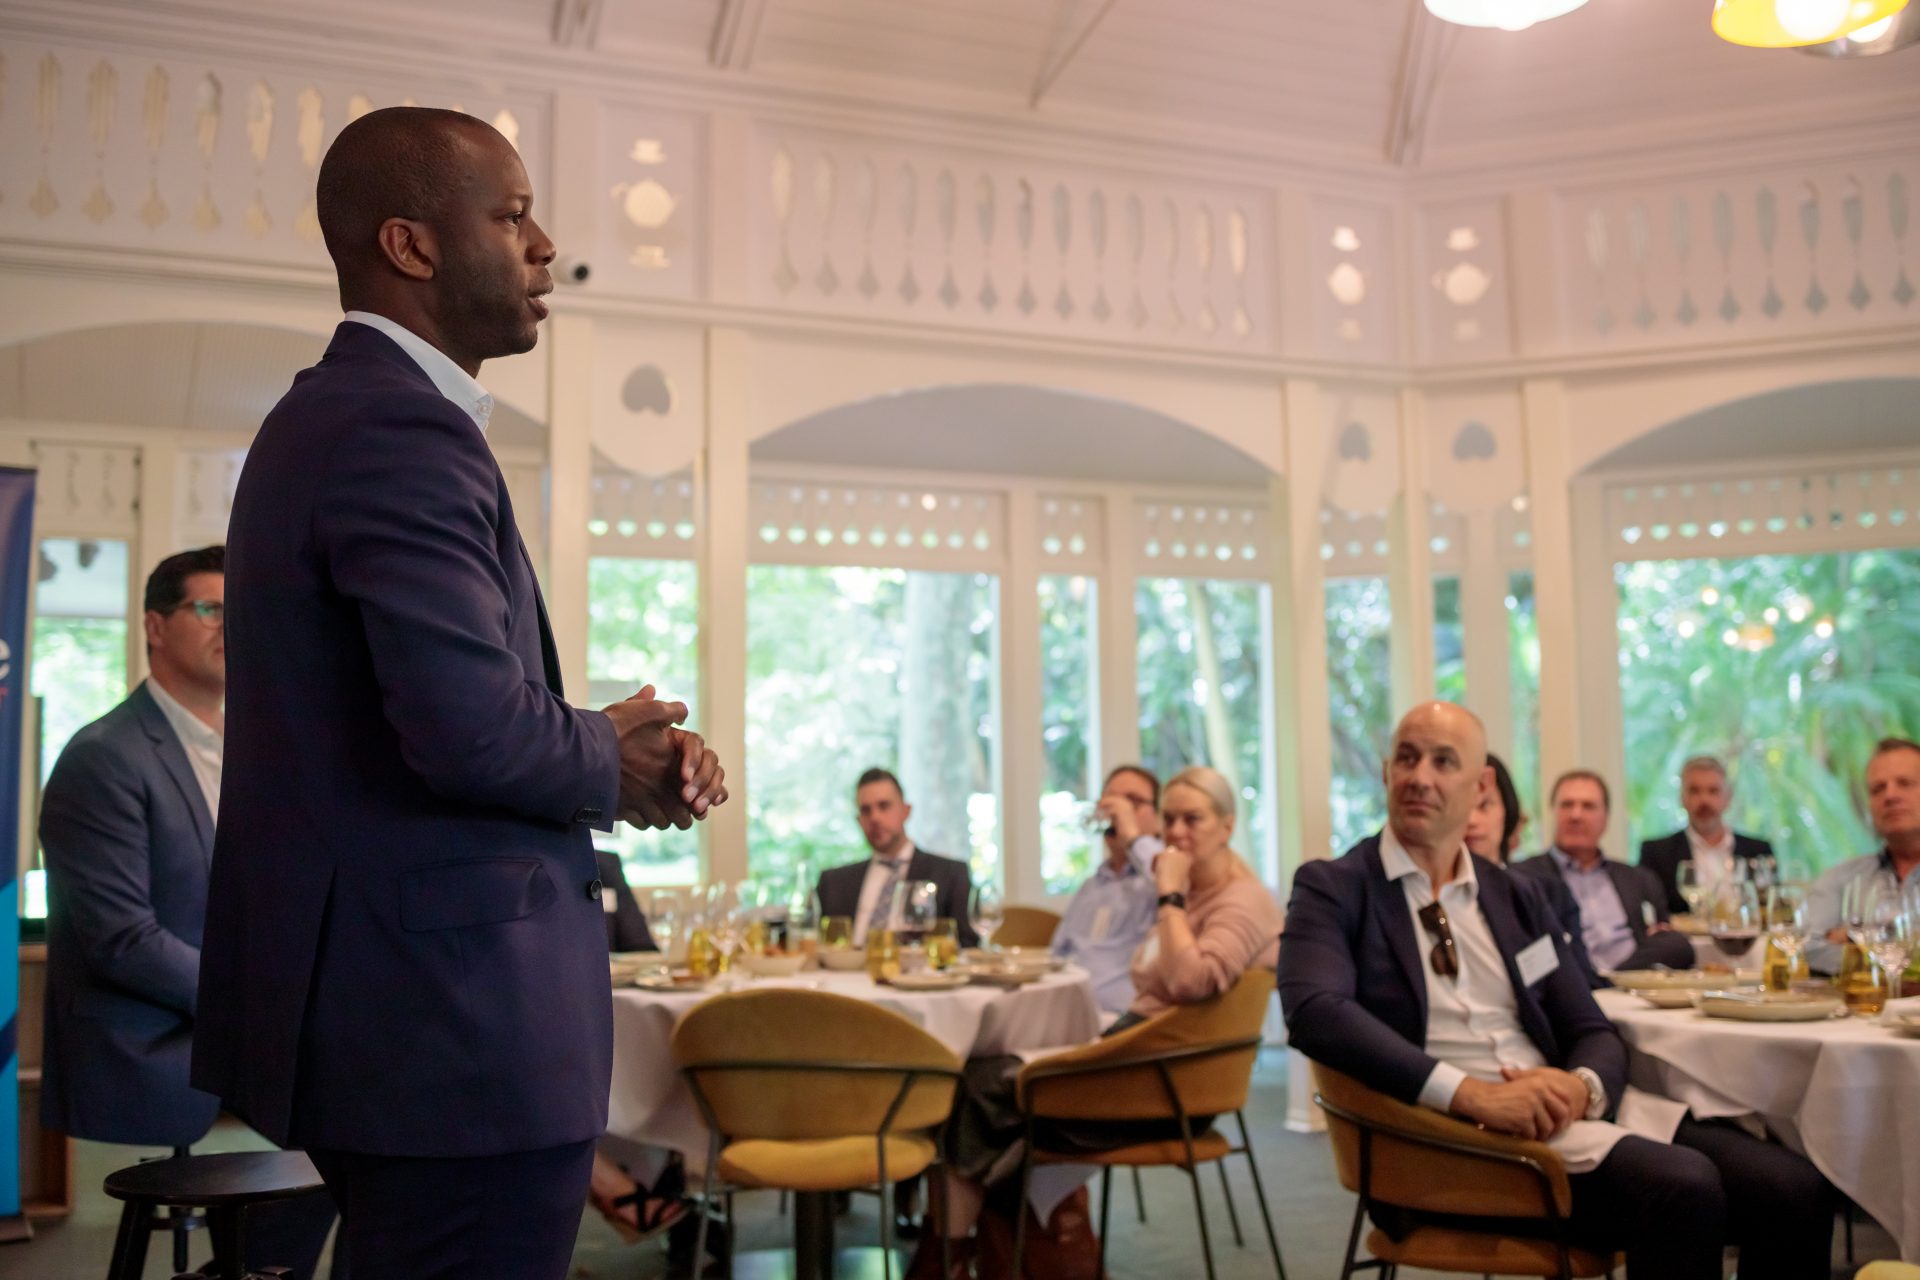 Showcase SA Inspiring Leaders lunch with Bruce Djite (pic: MiLCO/Remco Albers)